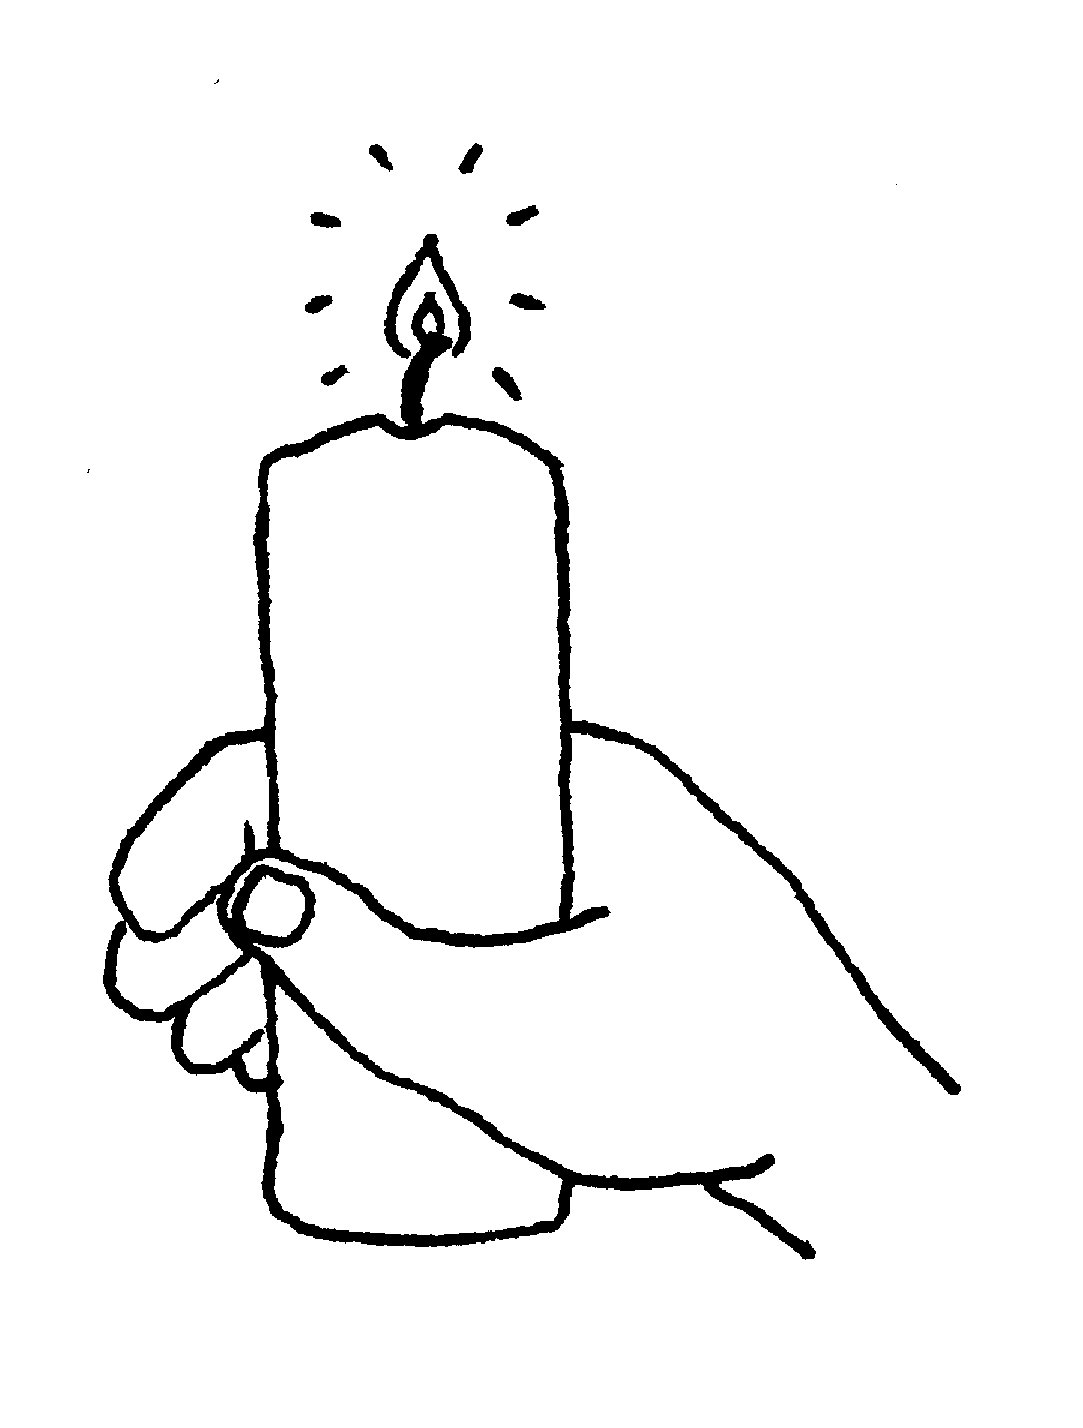 Free candles clip art free cl - Church Candles Clipart